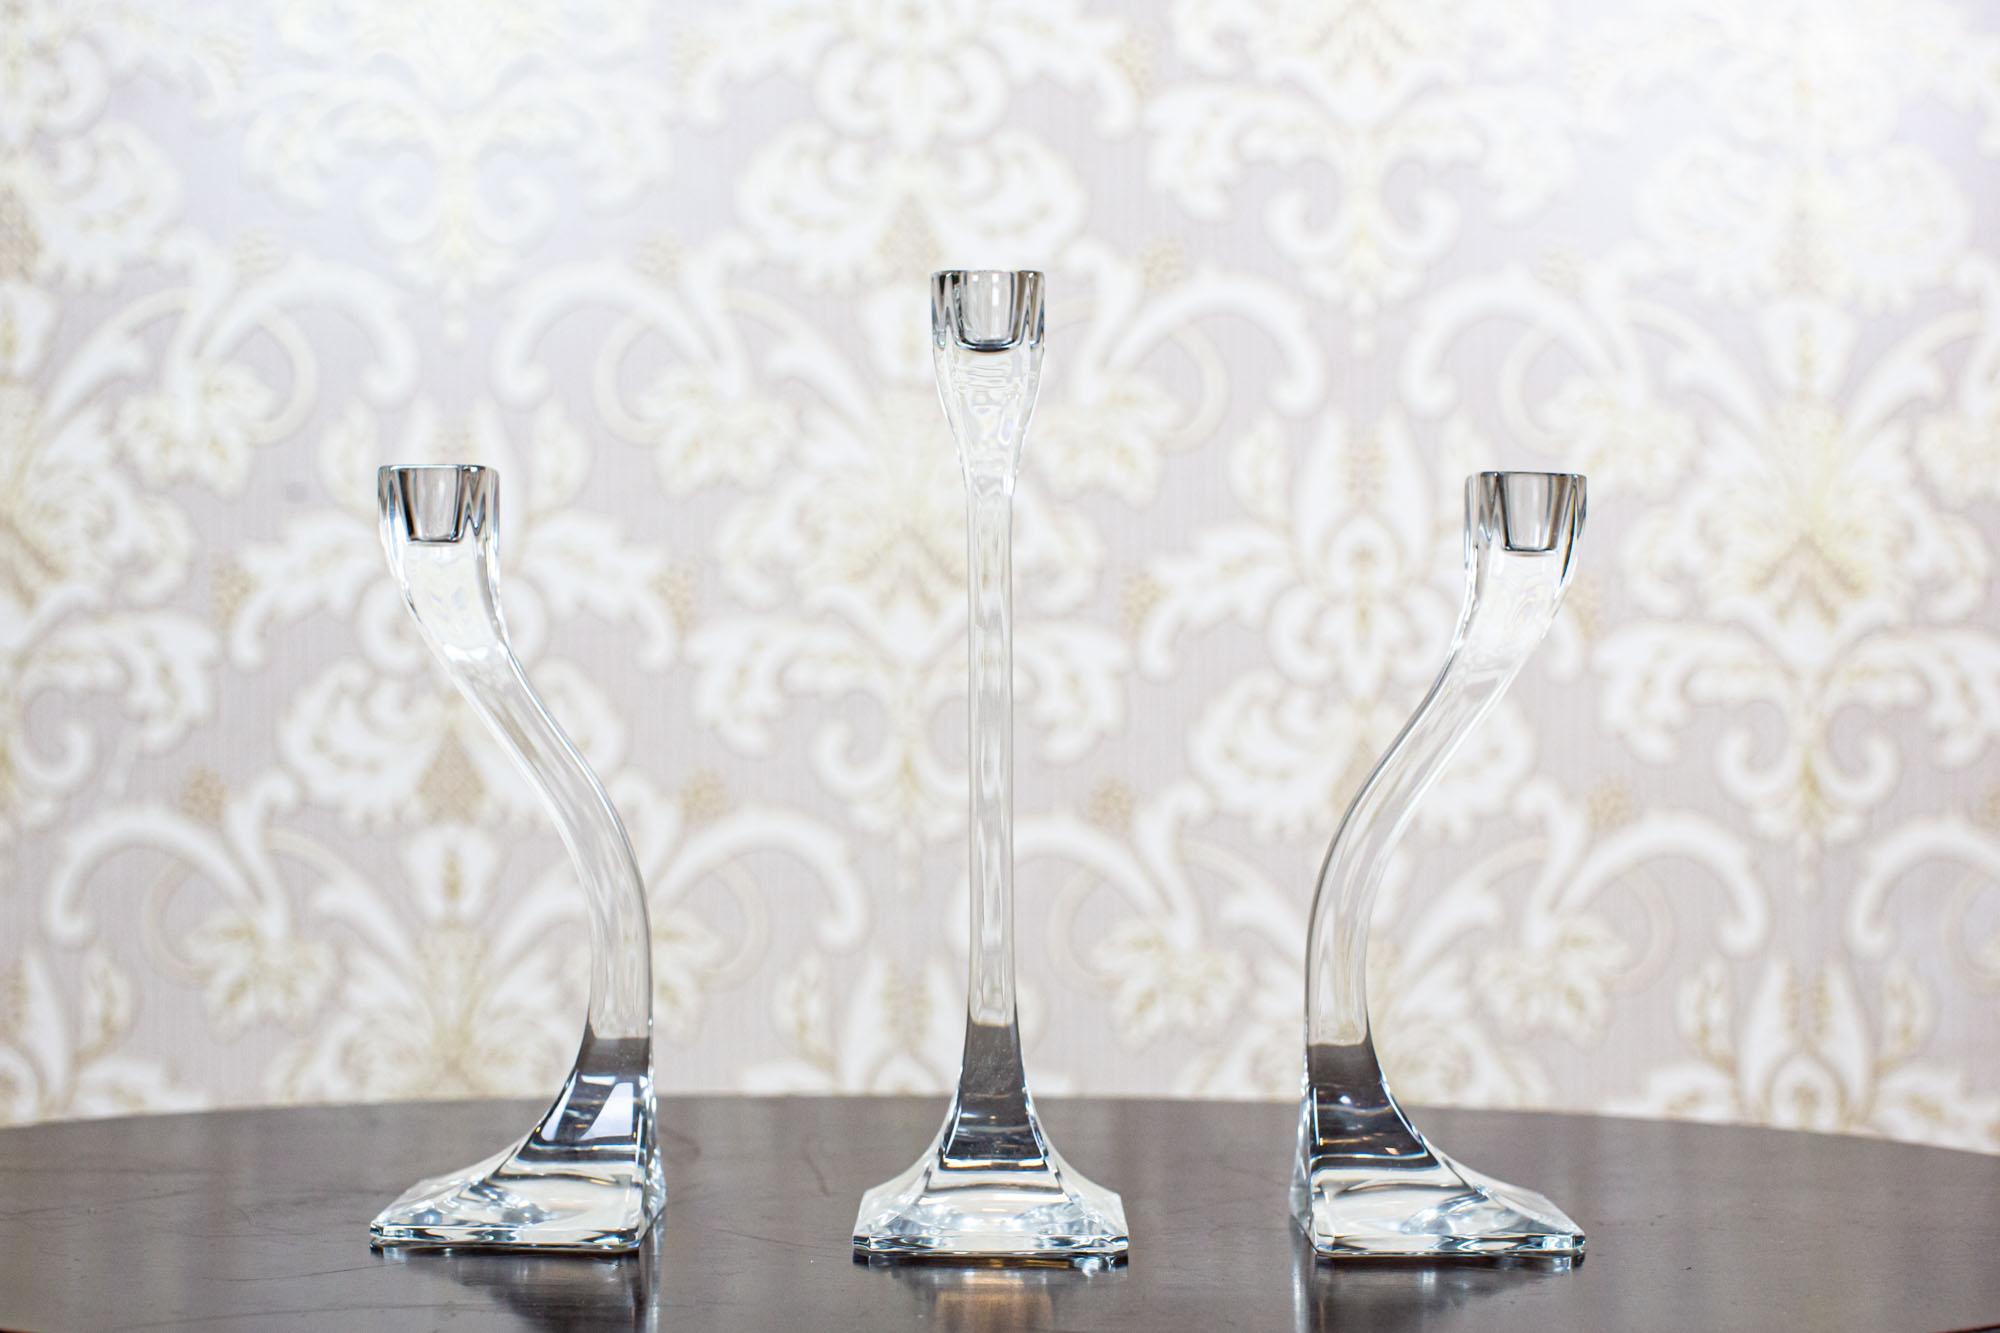 Early-20th Century Set of Three Glass Candlesticks

We present you three glass candlesticks from the 1st half of the 20th century.

They are in incredibly good condition and undamaged.